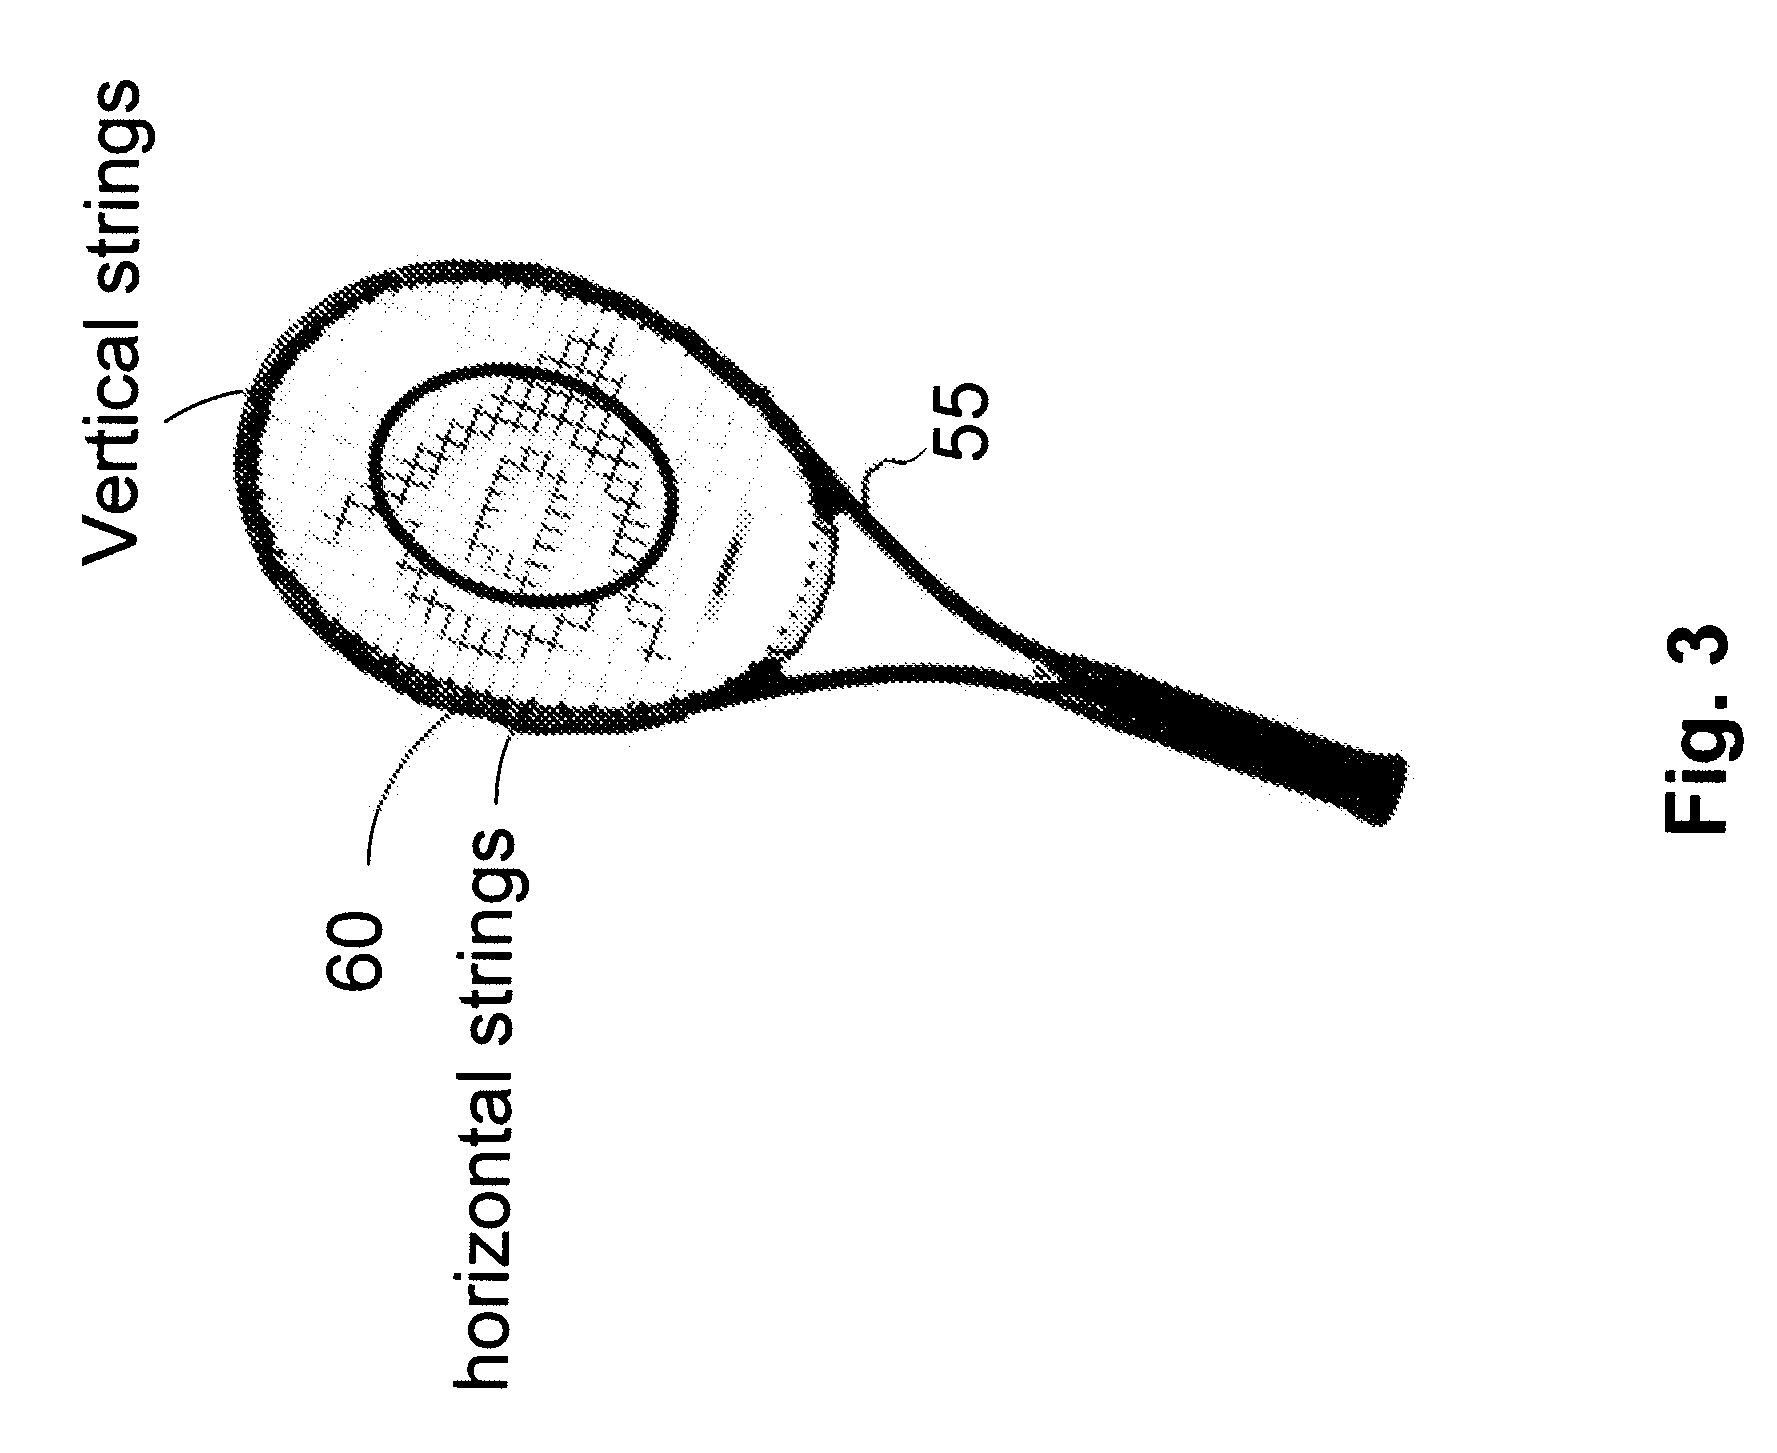 Racquet with Entertainment and Performance Feedback